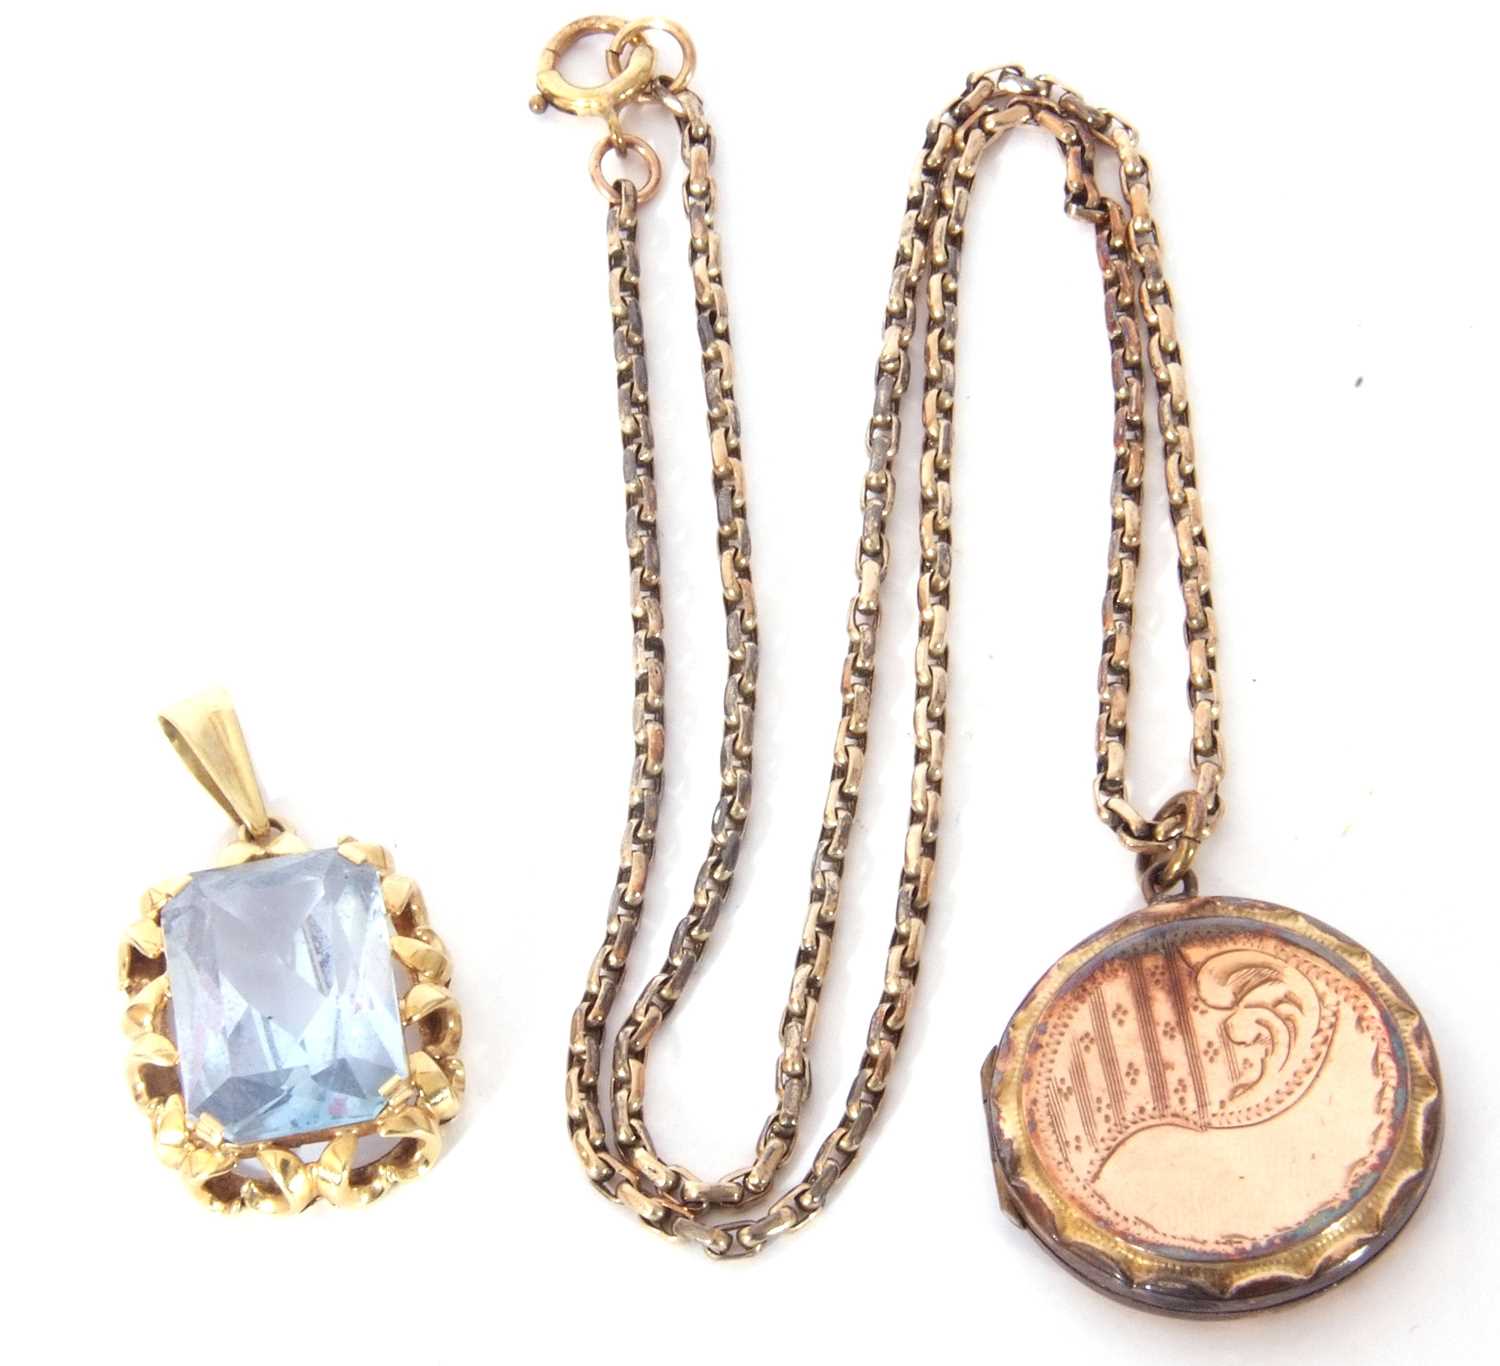 Mixed Lot: modern 575 mid-blue stone pendant, 20 x 12mm, together with an antique gold plated